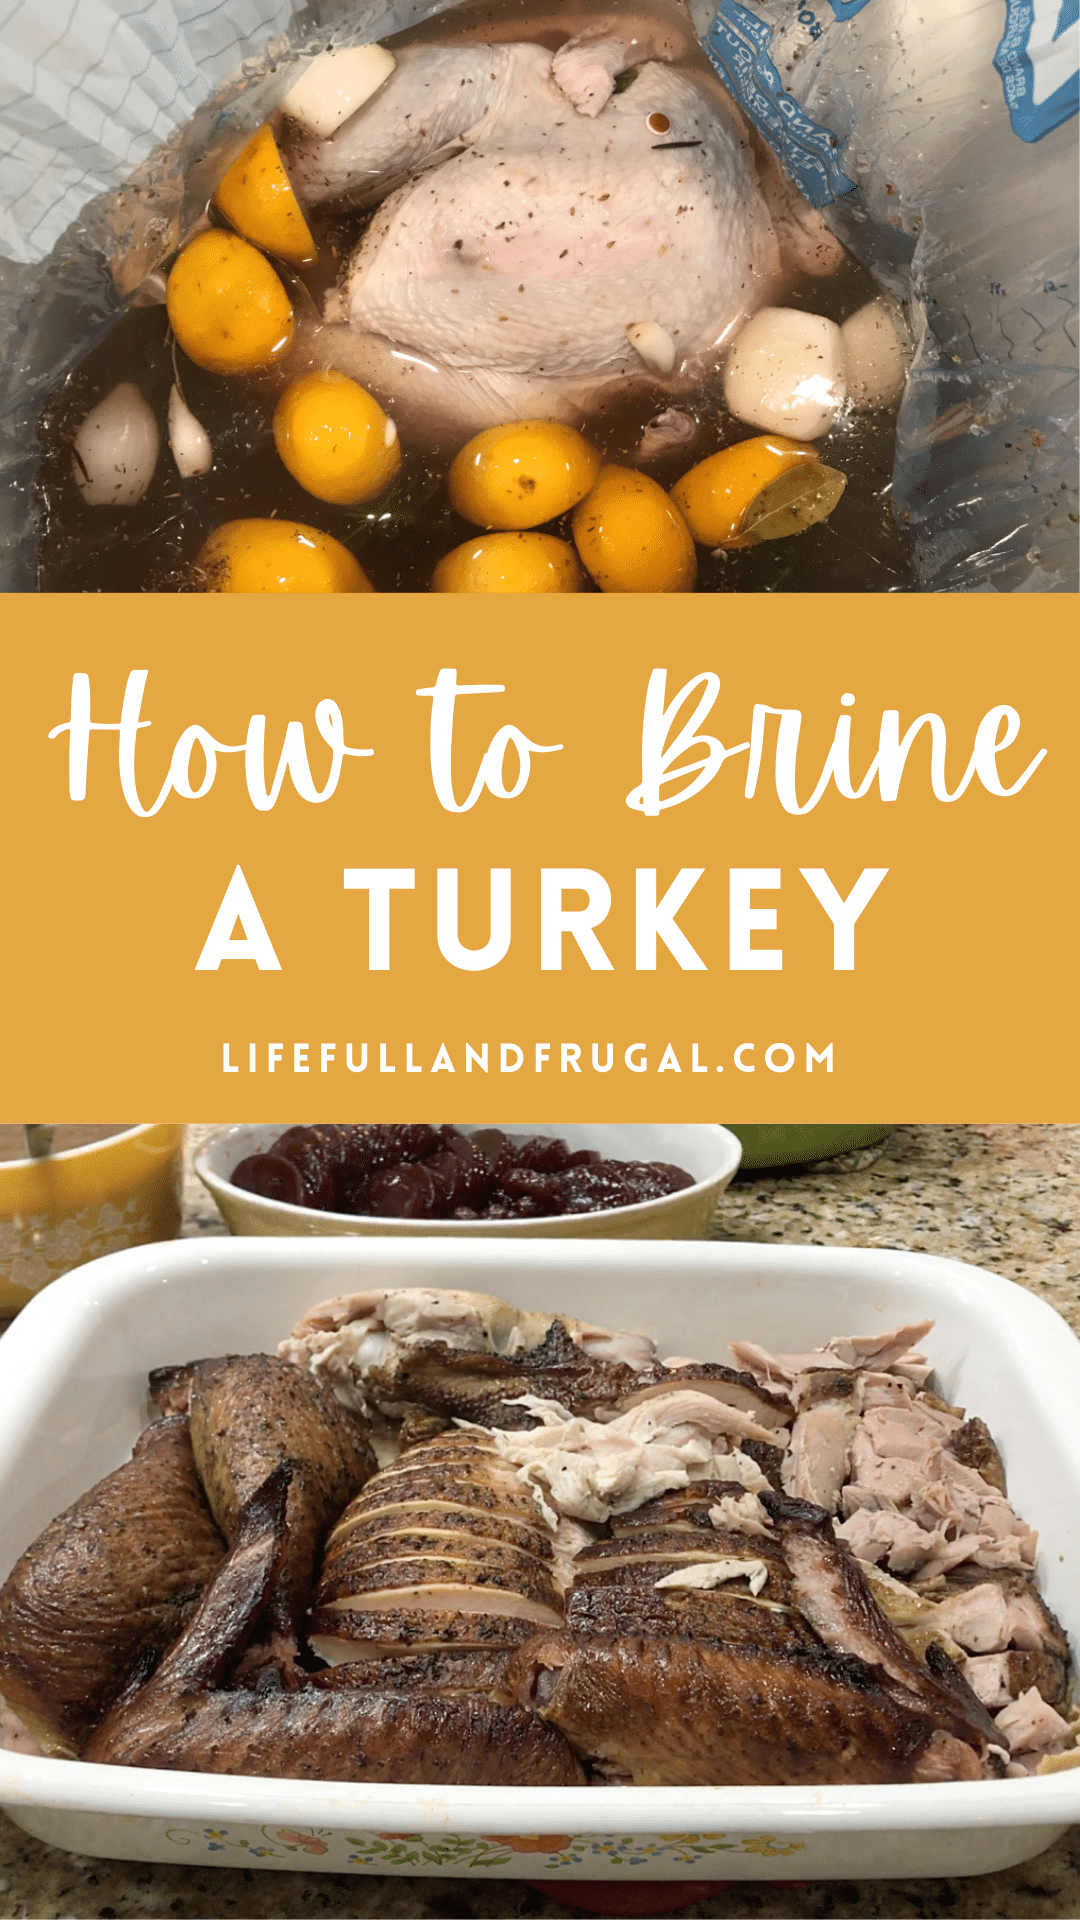 How to Brine a Turkey - Life Full and Frugal